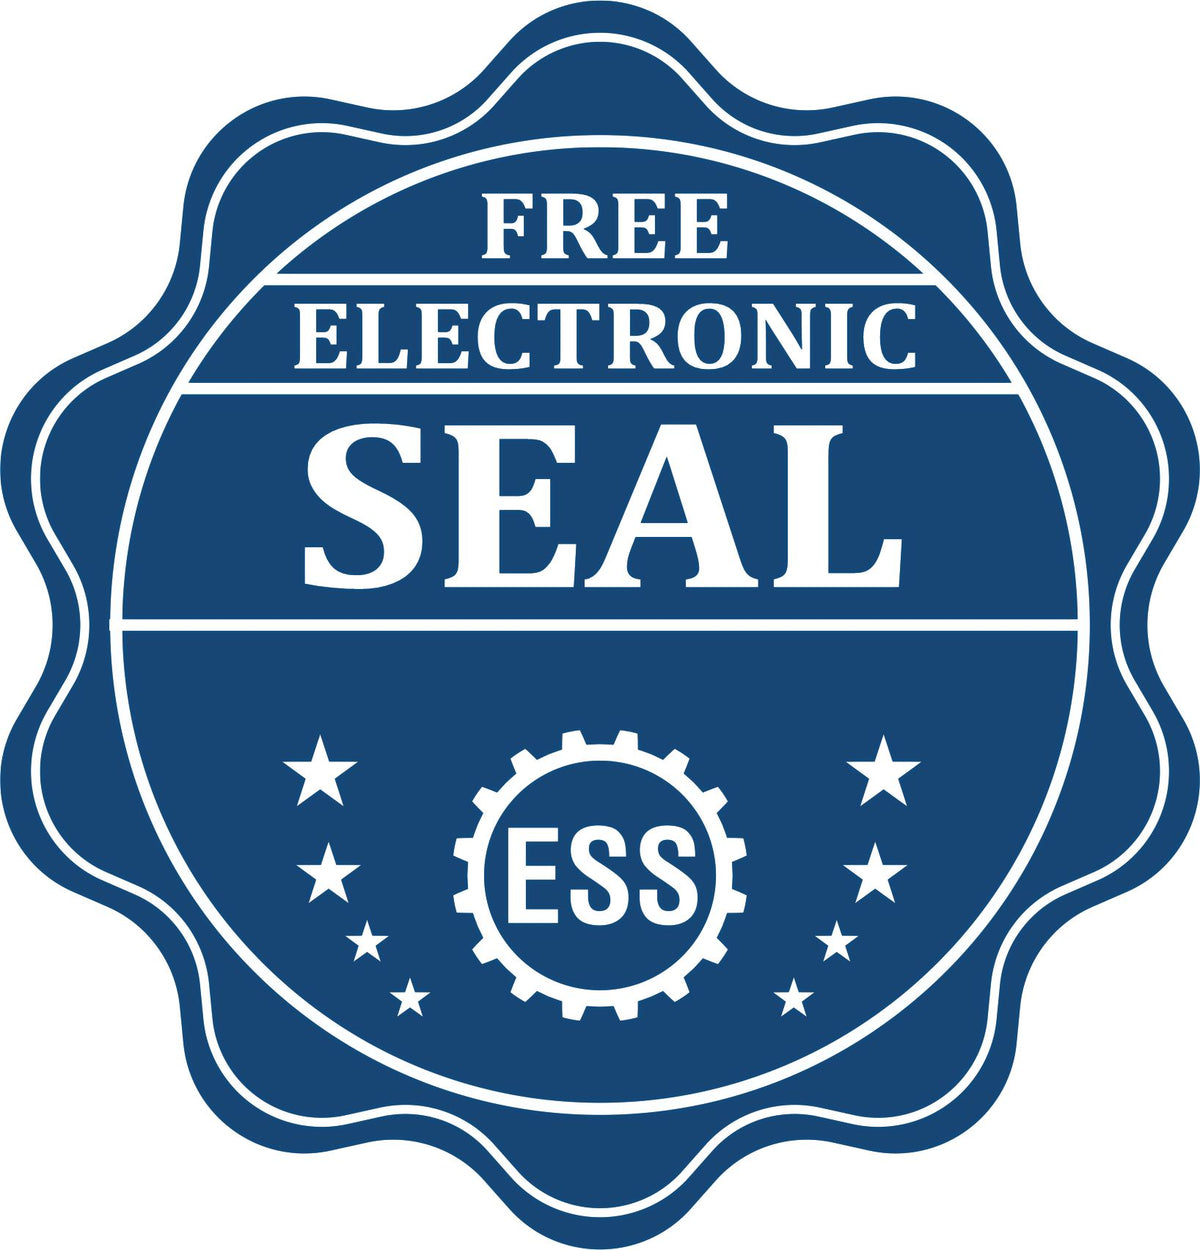 A badge showing a free electronic seal for the Soft Pocket Kansas Landscape Architect Embosser with stars and the ESS gear on the emblem.